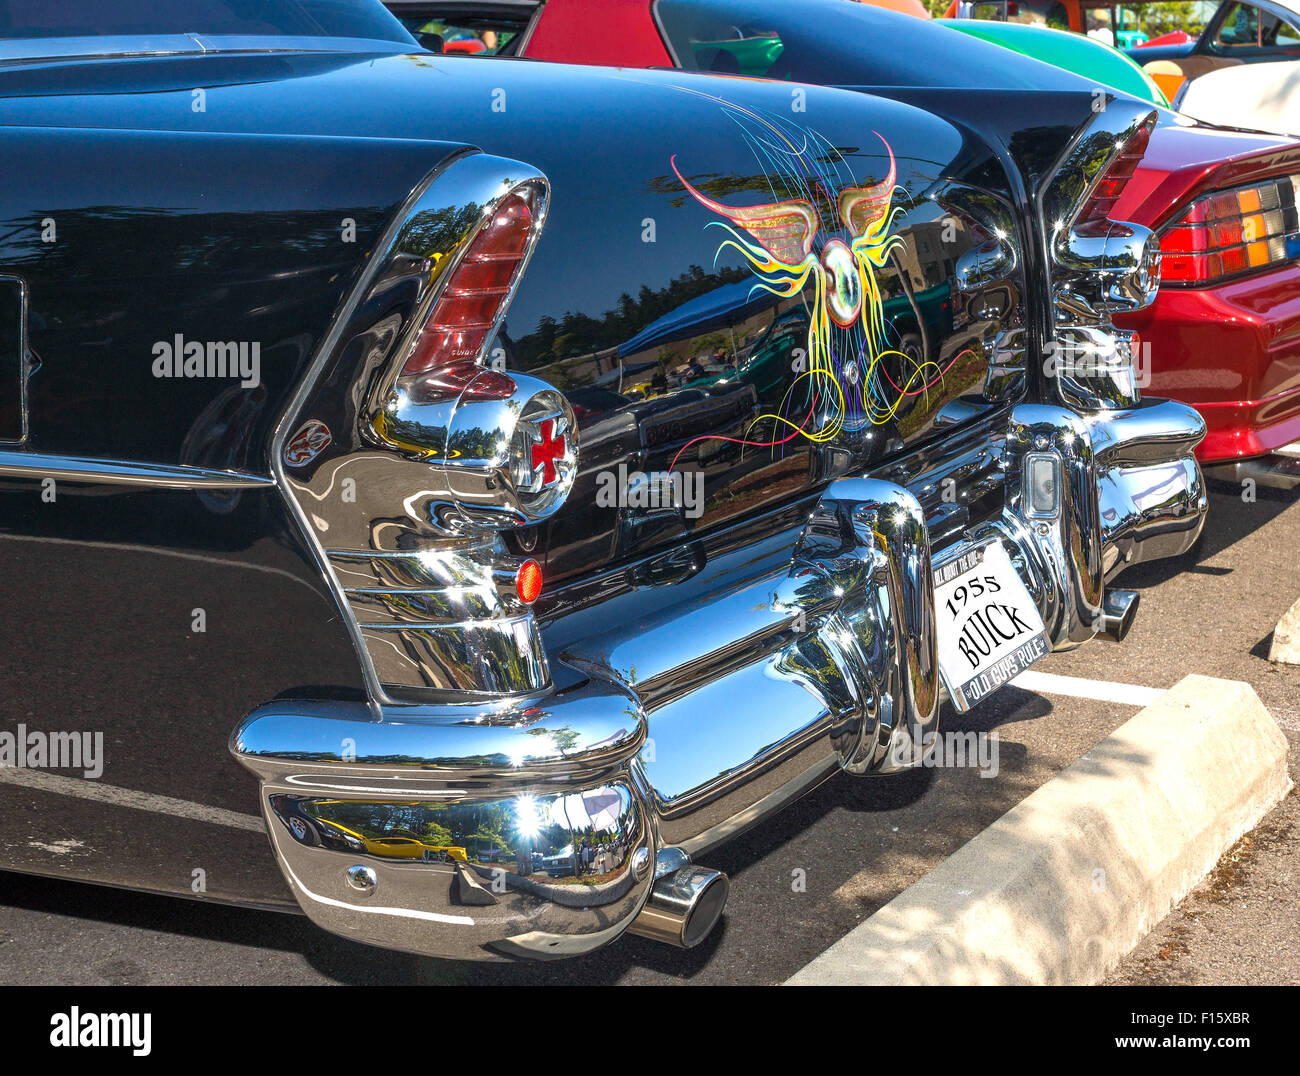 Rear view of a 1955 restored and customized Buick at a August, 2014 classic car show in Gig Harbor, Washington, State. Stock Photo